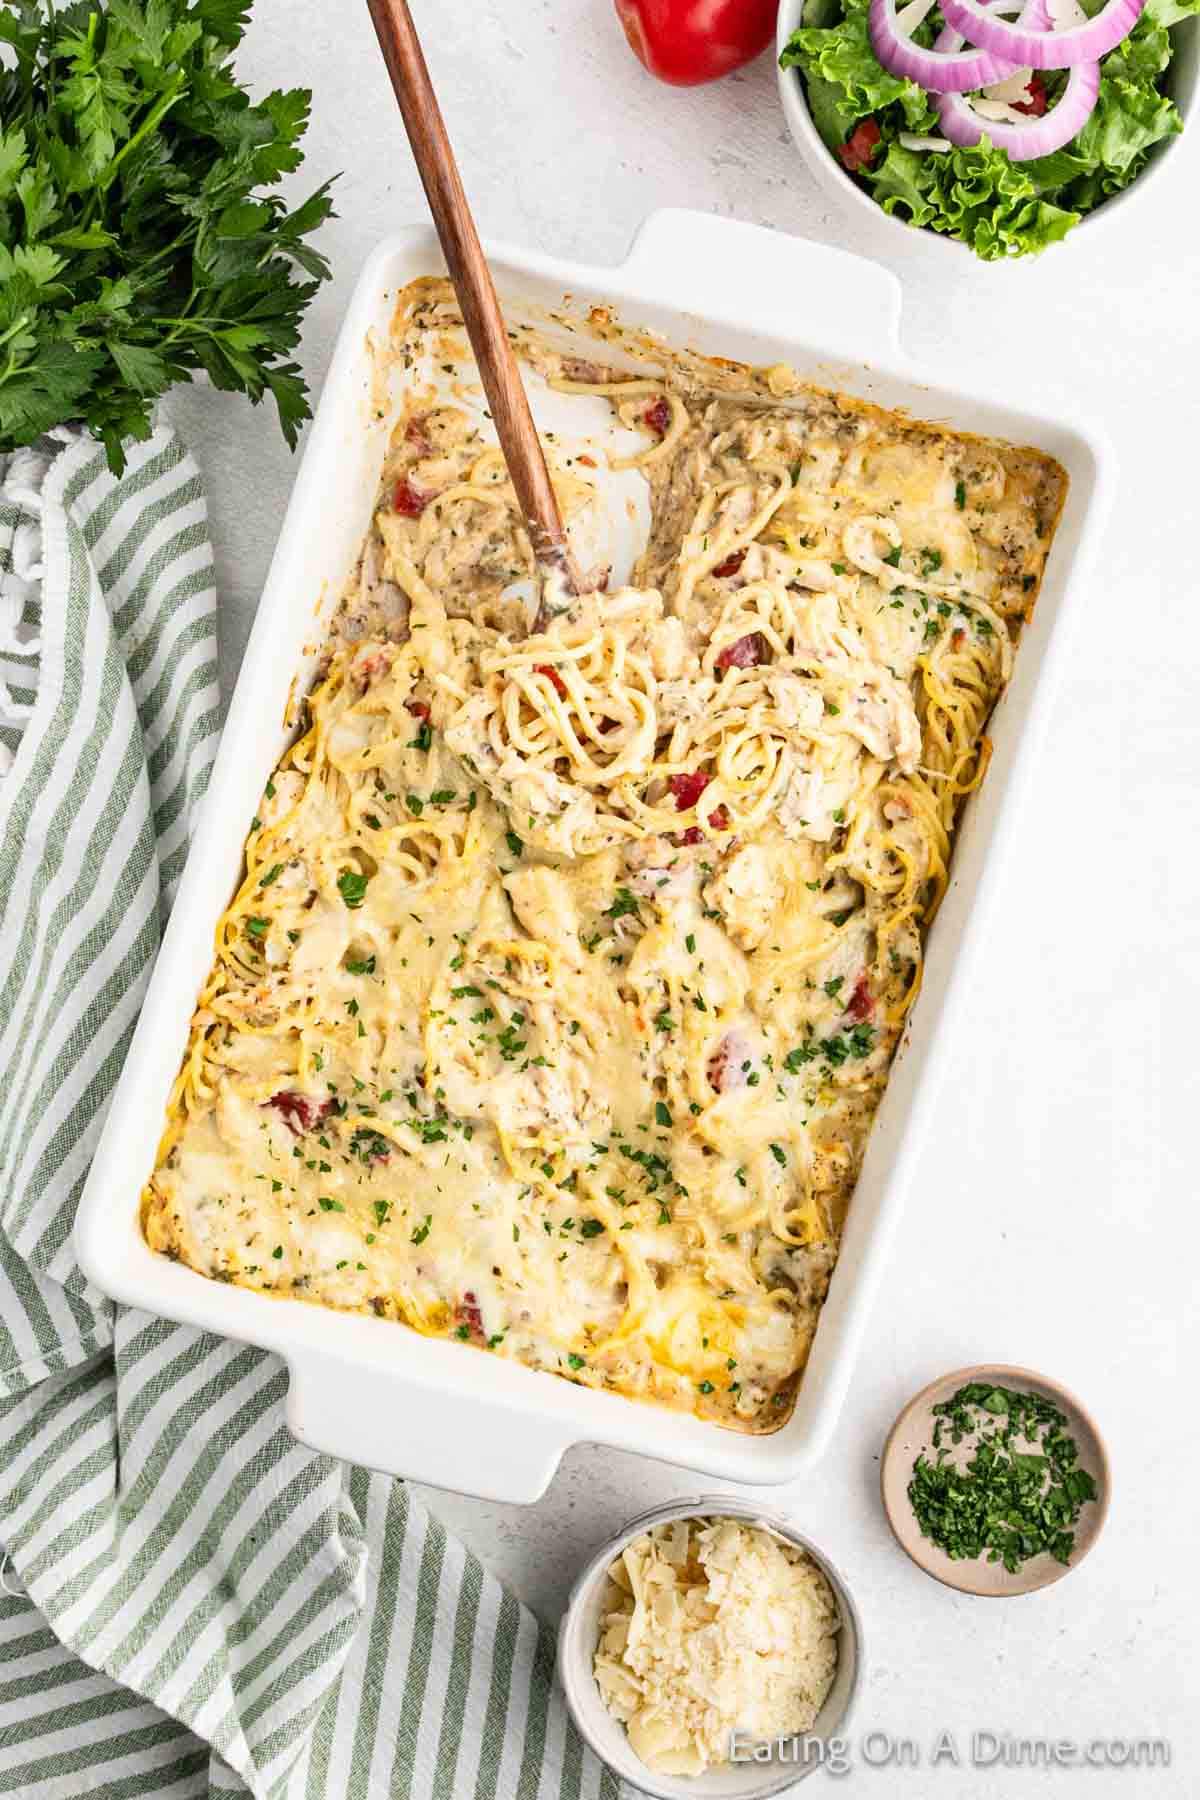 Chicken Spaghetti Casserole in a baking dish with a wooden spoon